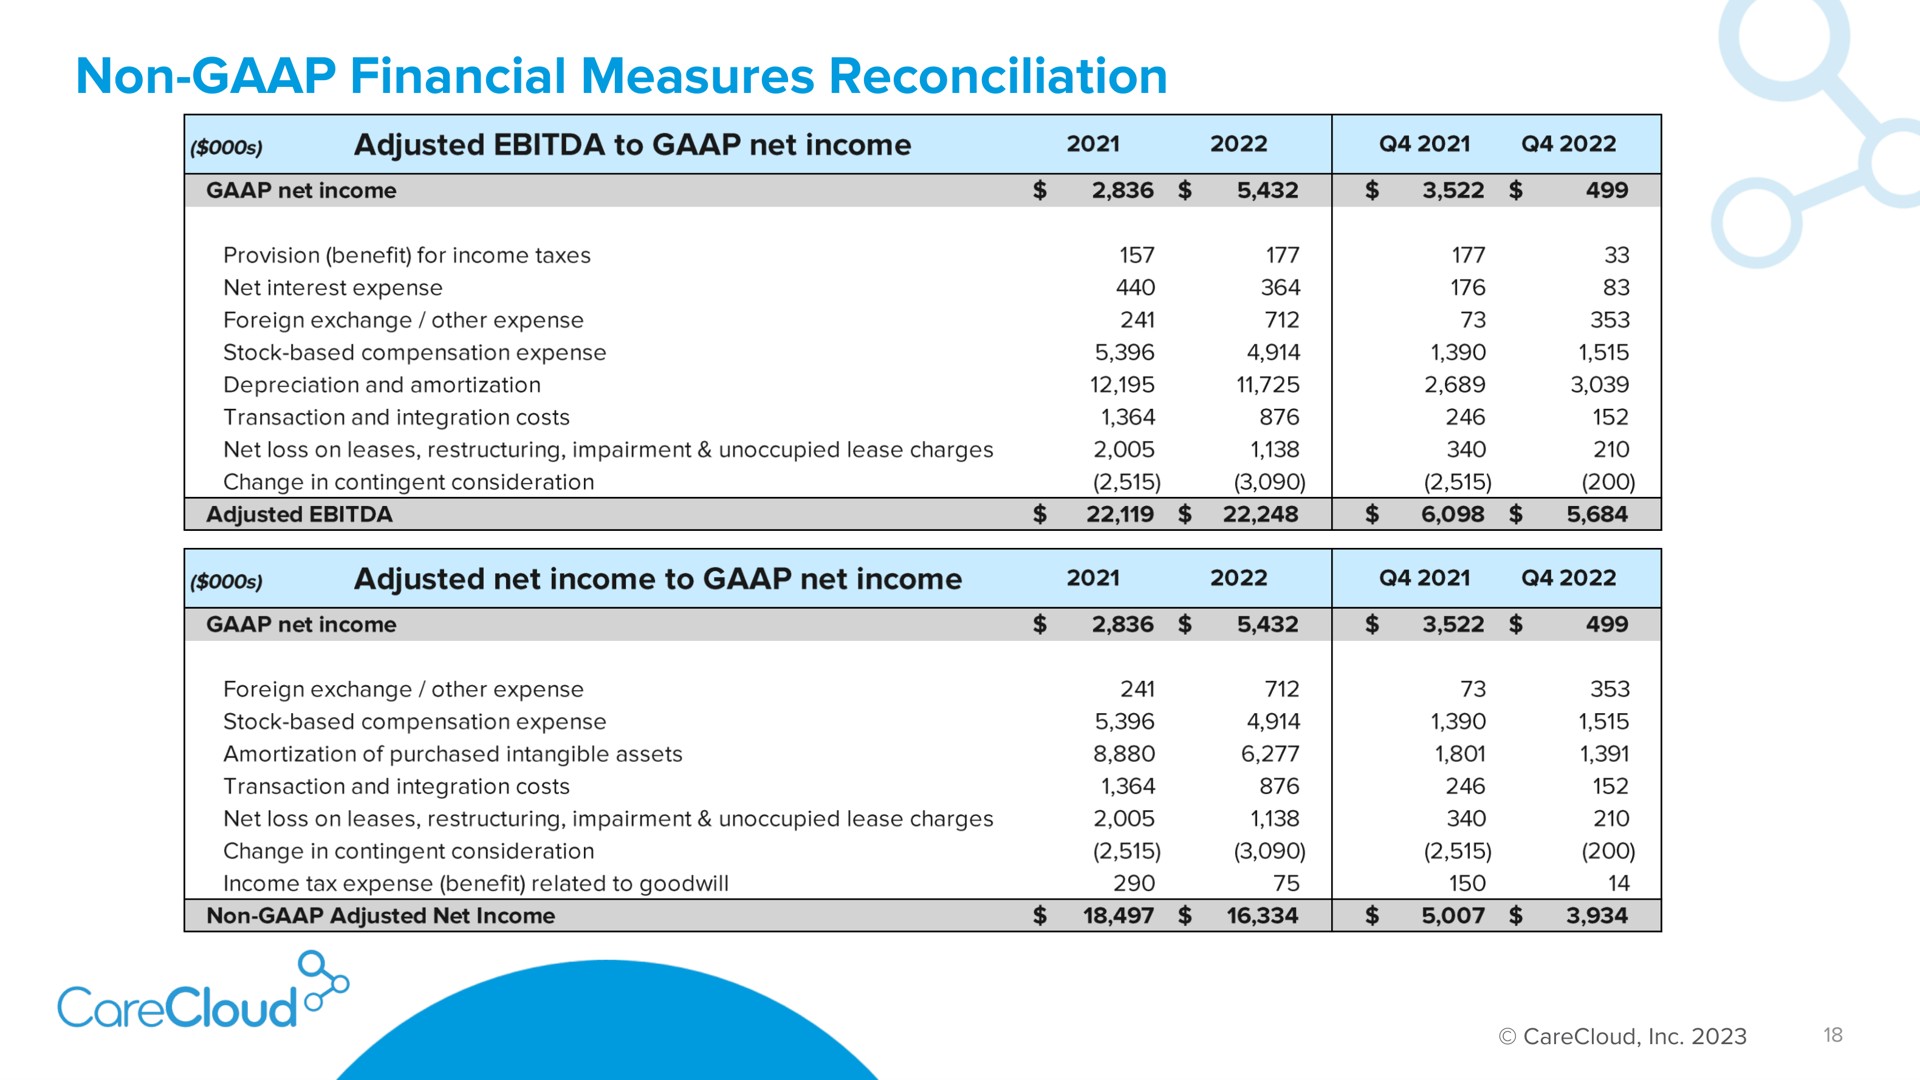 non financial measures reconciliation adjusted to net income | CareCloud